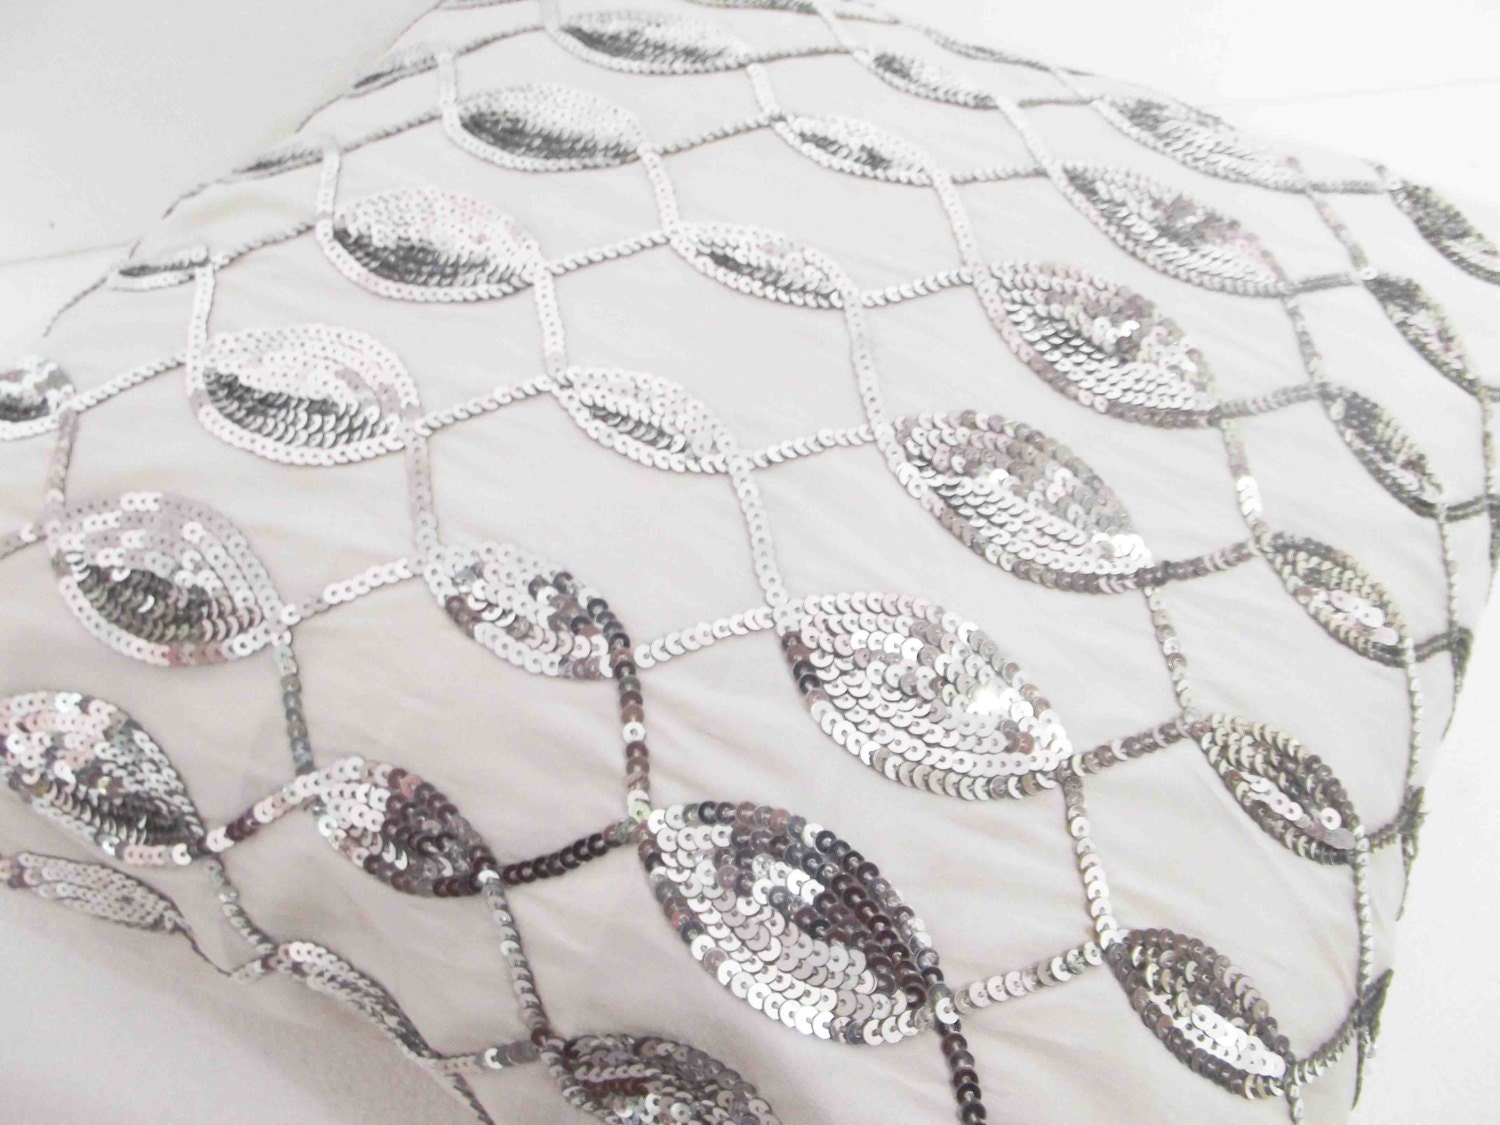 decorative white silver  sequins cushion with waves pattern in size 16x16inches